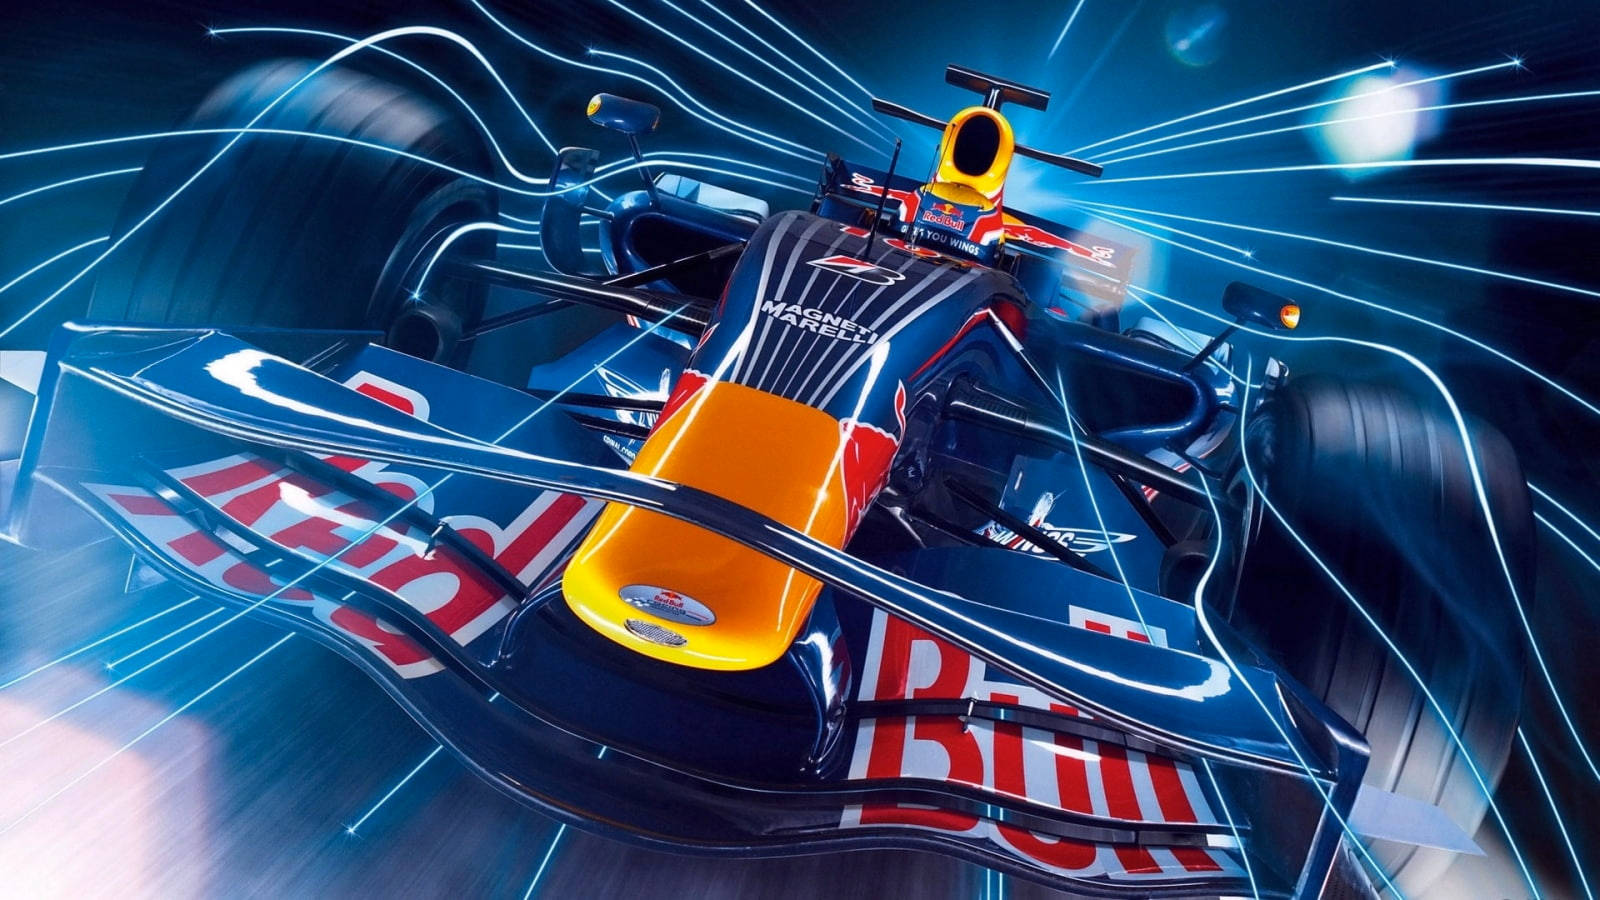 F1 Racing Graphic Art Background